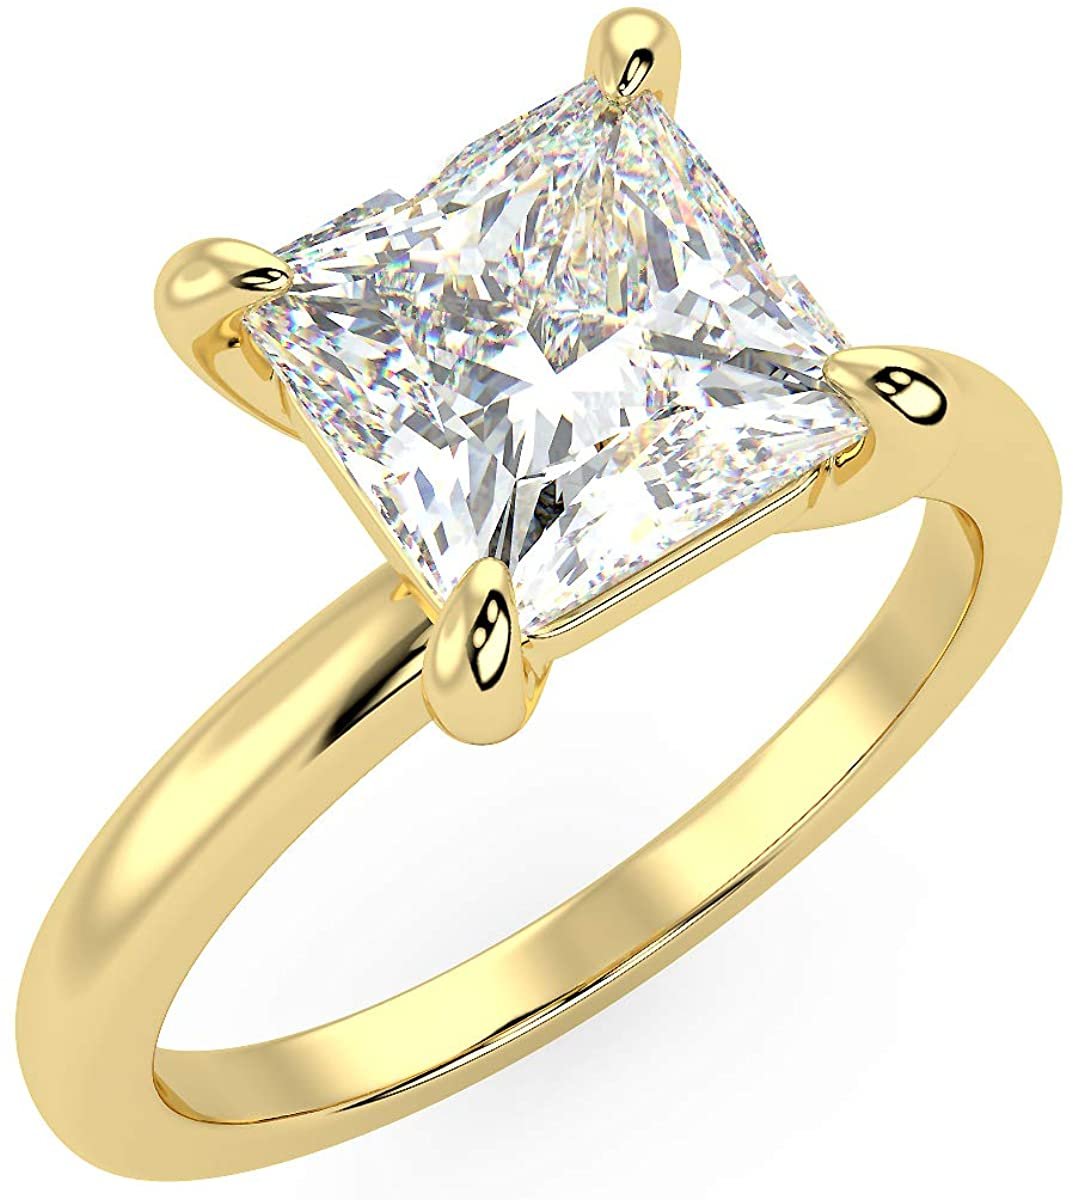 IGI Certified 14K Yellow Gold 2.0 Carat Princess-Cut Lab Created Diamond Classic Square Solitaire Engagement Ring (G-H Color, VS1-VS2 Clarity) - Size 7-1/2